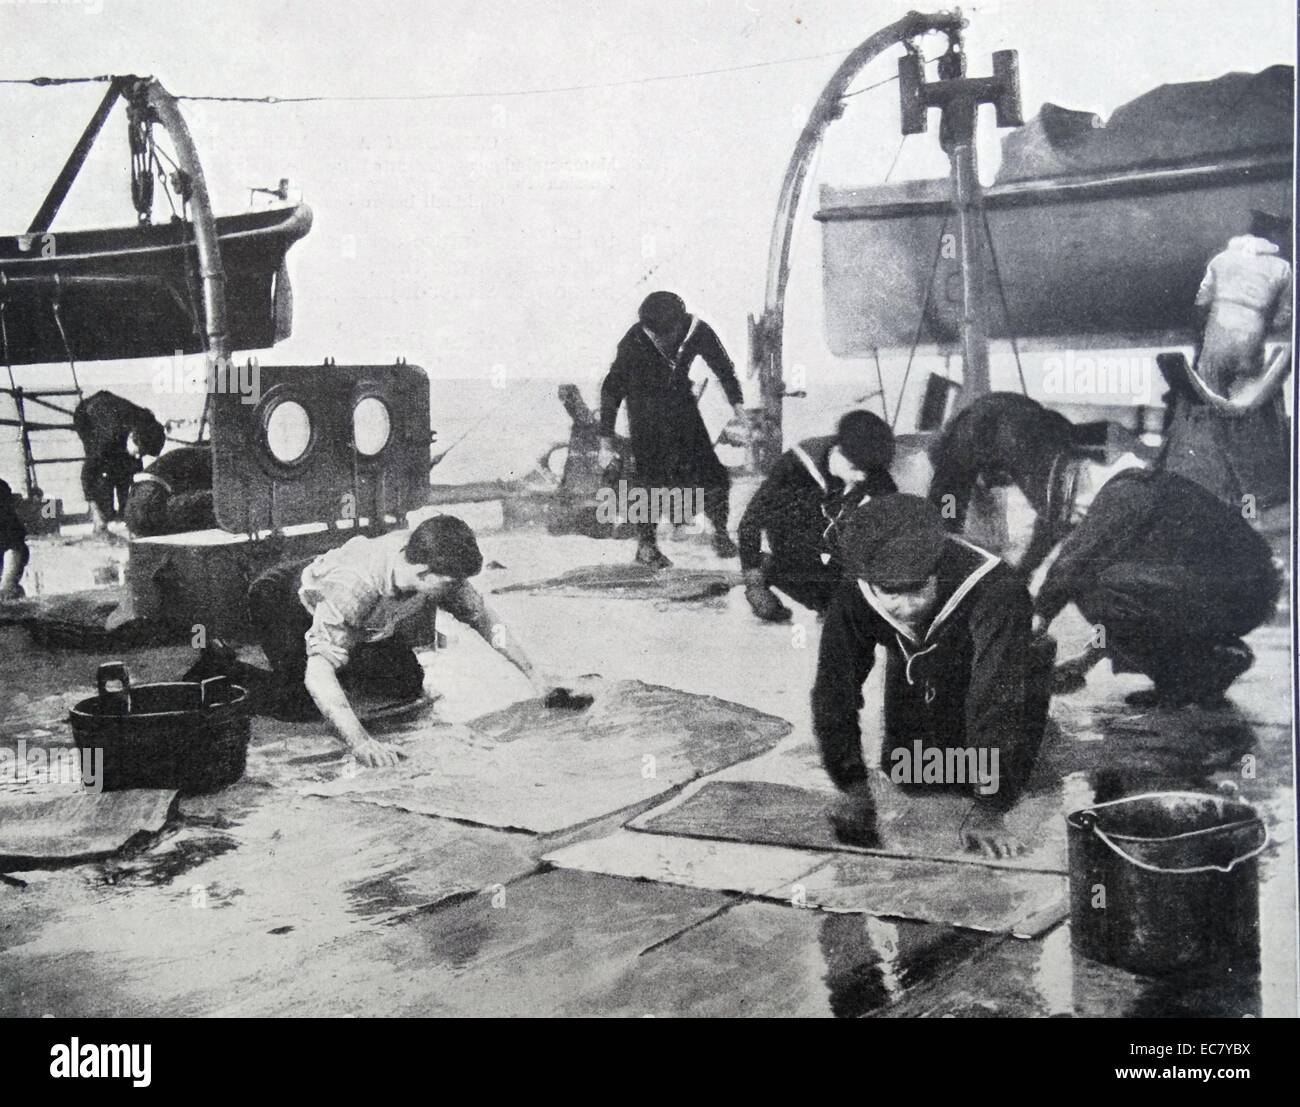 Sailors wash clothes on deck on a British naval ship during world war one 1916 Stock Photo